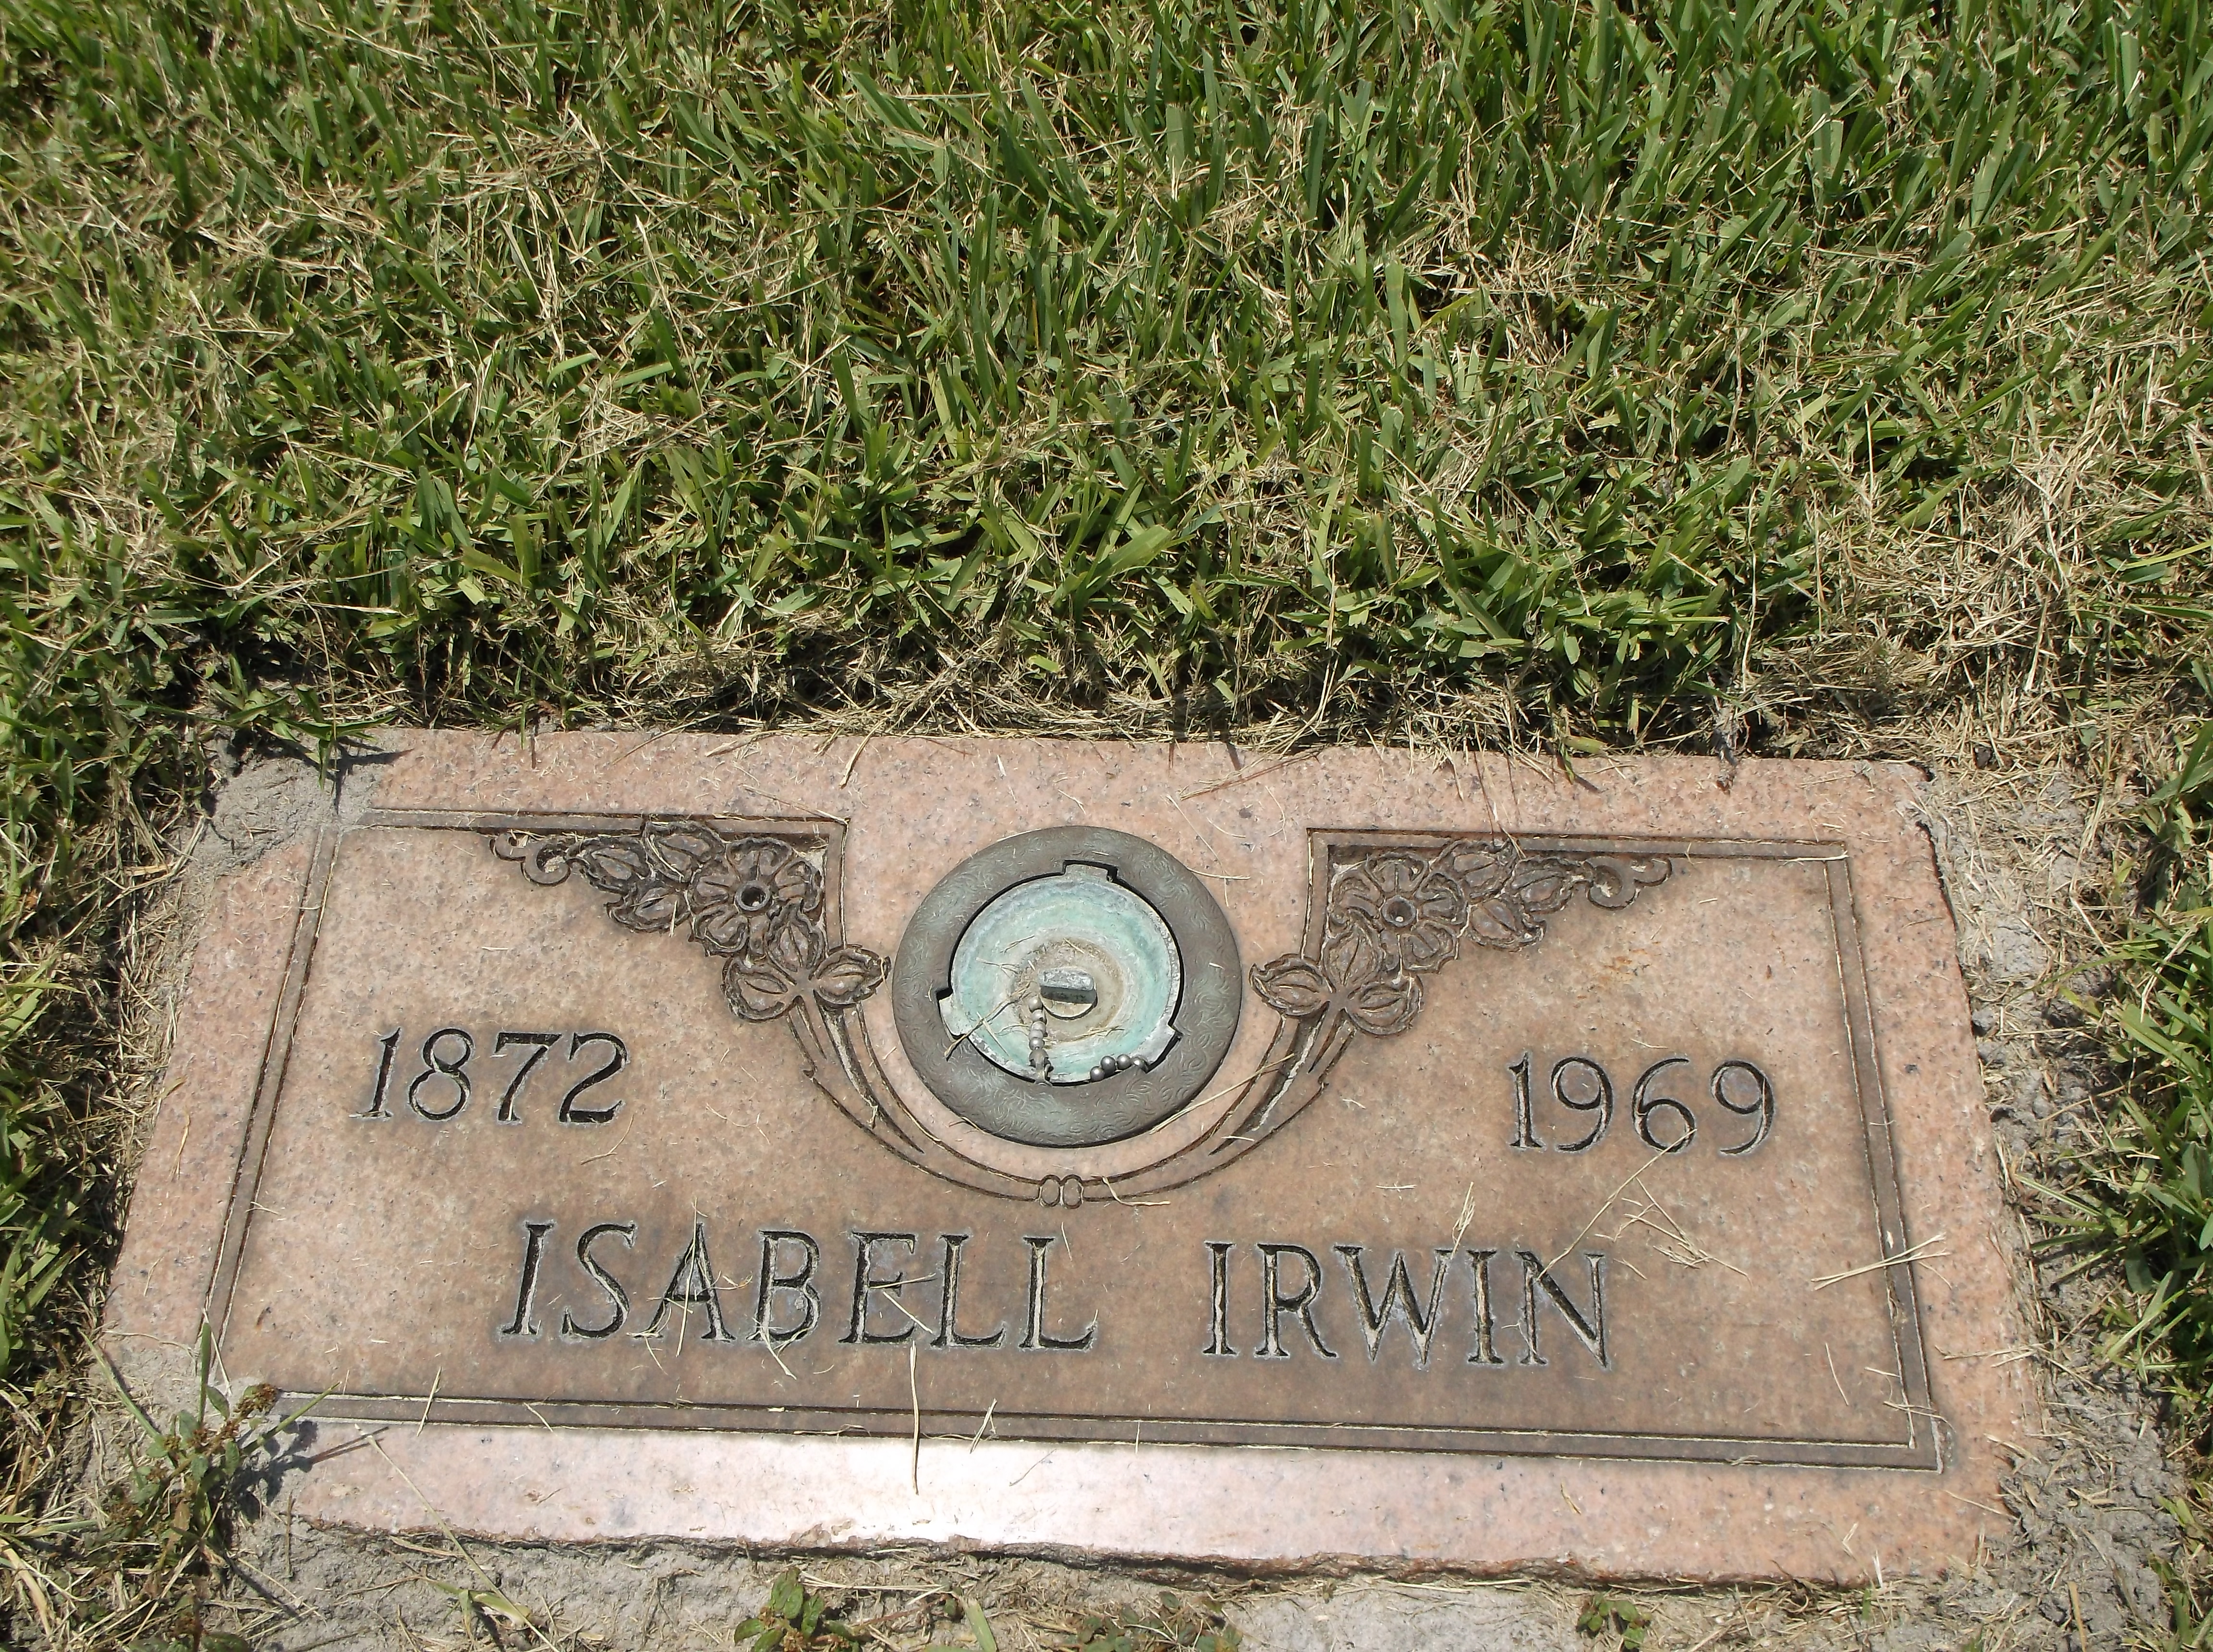 Isabell Irwin